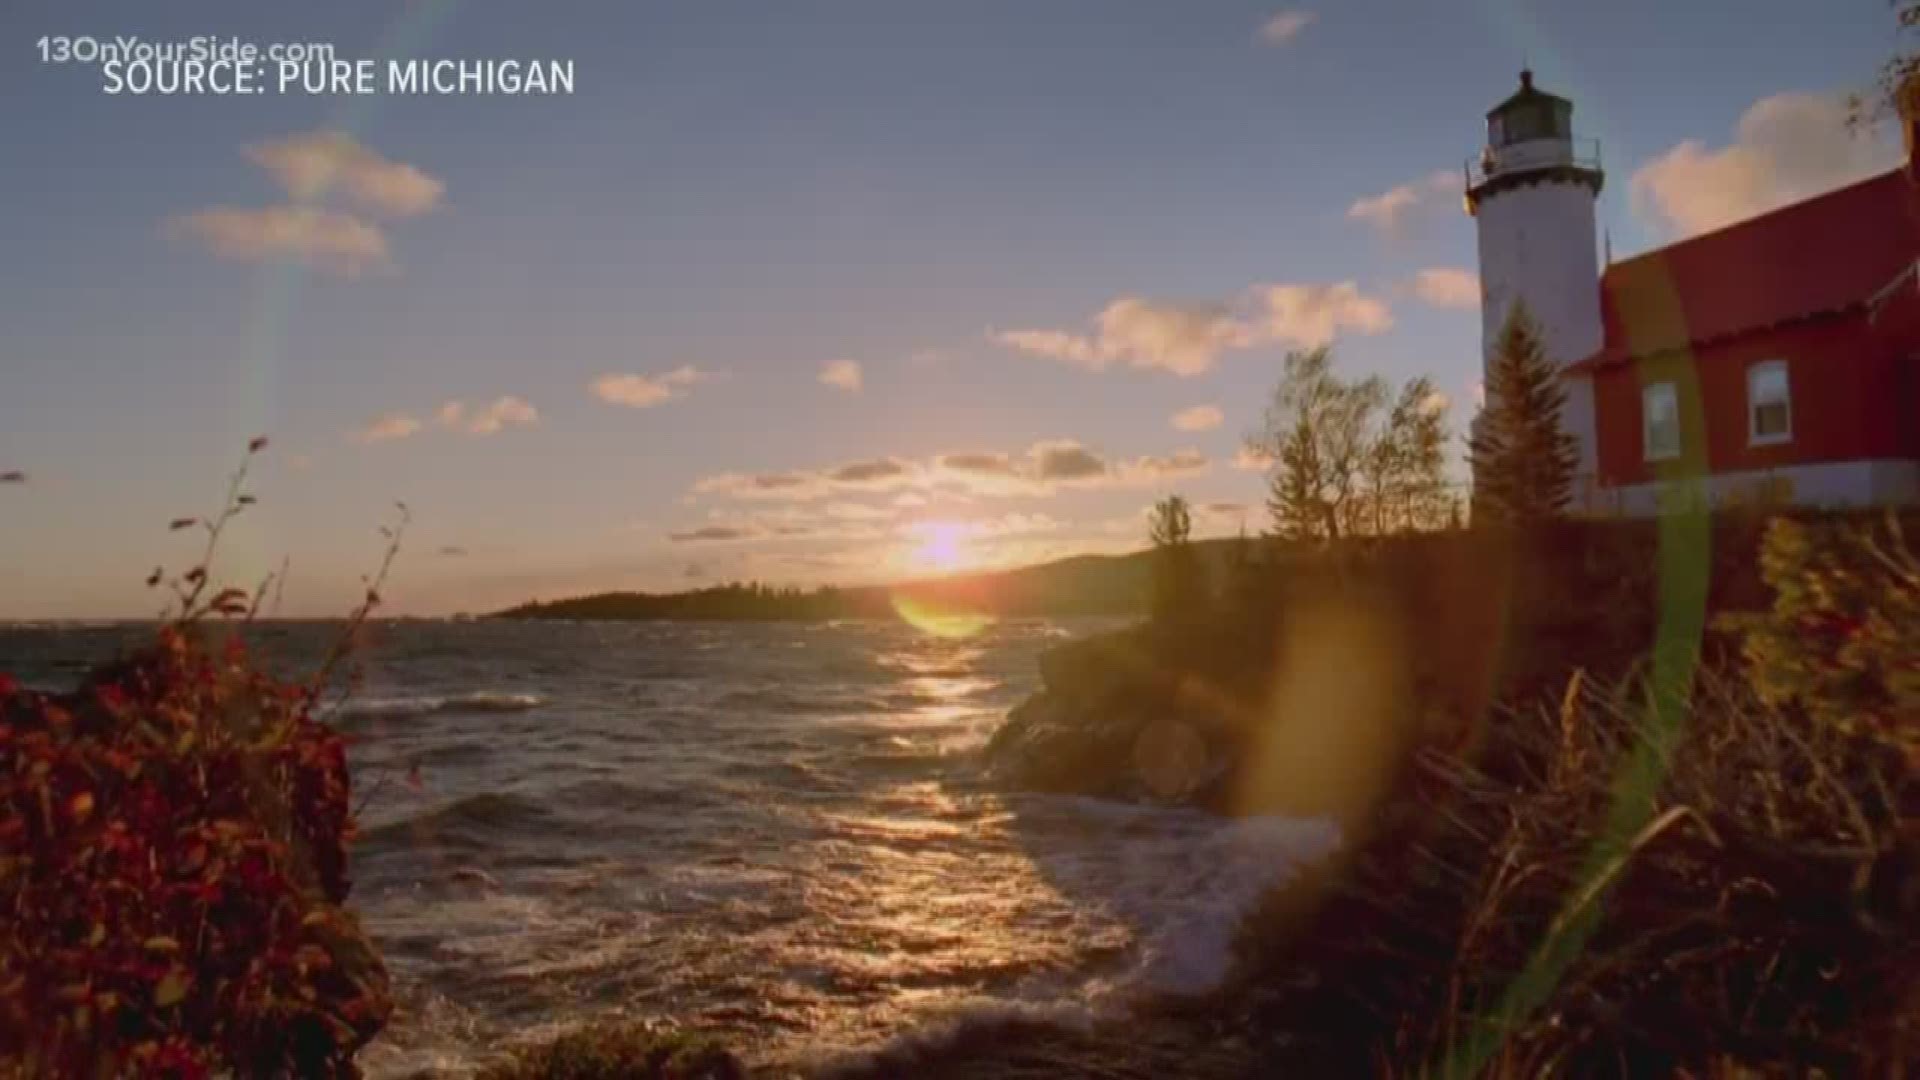 The Michigan budget bill which was approved by the House and Senate this week has some in the tourism industry worried. The budget eliminates the long-standing